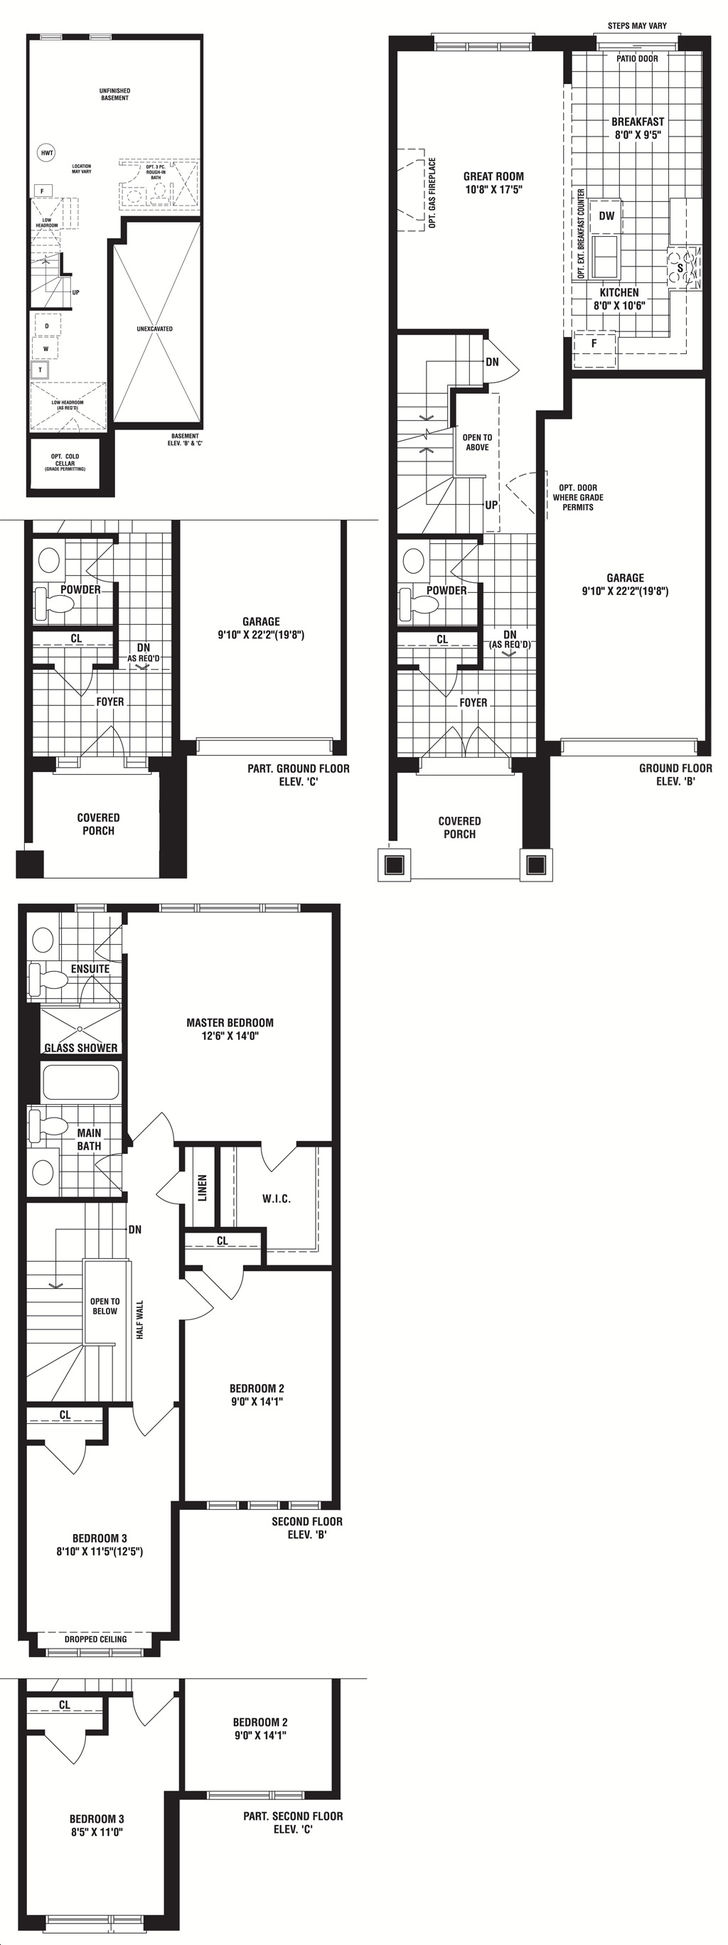 Mapleview Park Towns by Fernbrook |Cameron TH Floorplan 3 bed & 2.5 bath